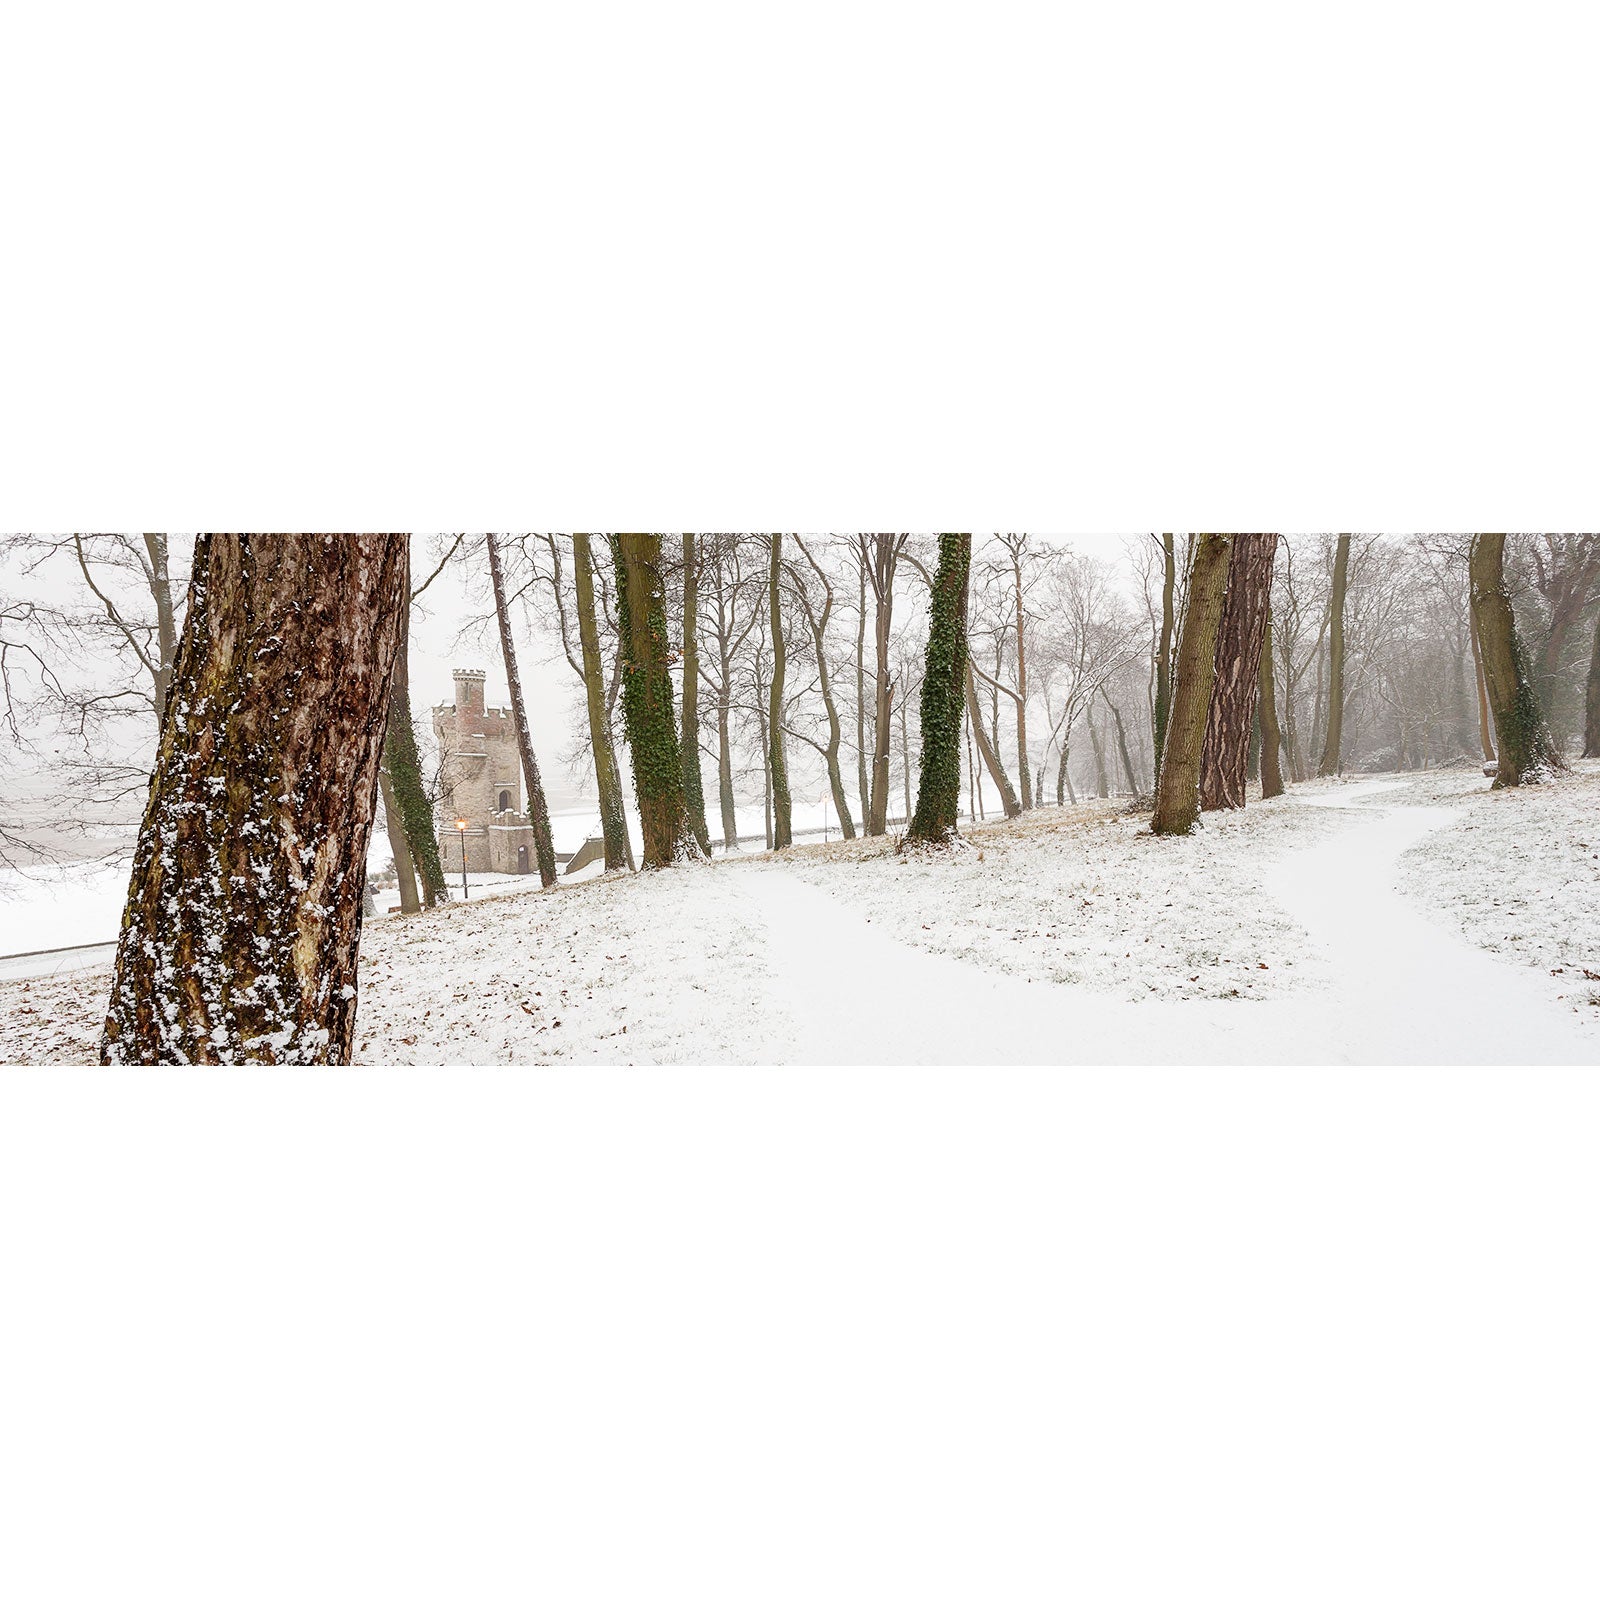 A tranquil winter scene on the Isle with a snow-covered path and sparsely snow-dusted trees, leading towards Appley Tower shrouded in mist. (by Available Light Photography)